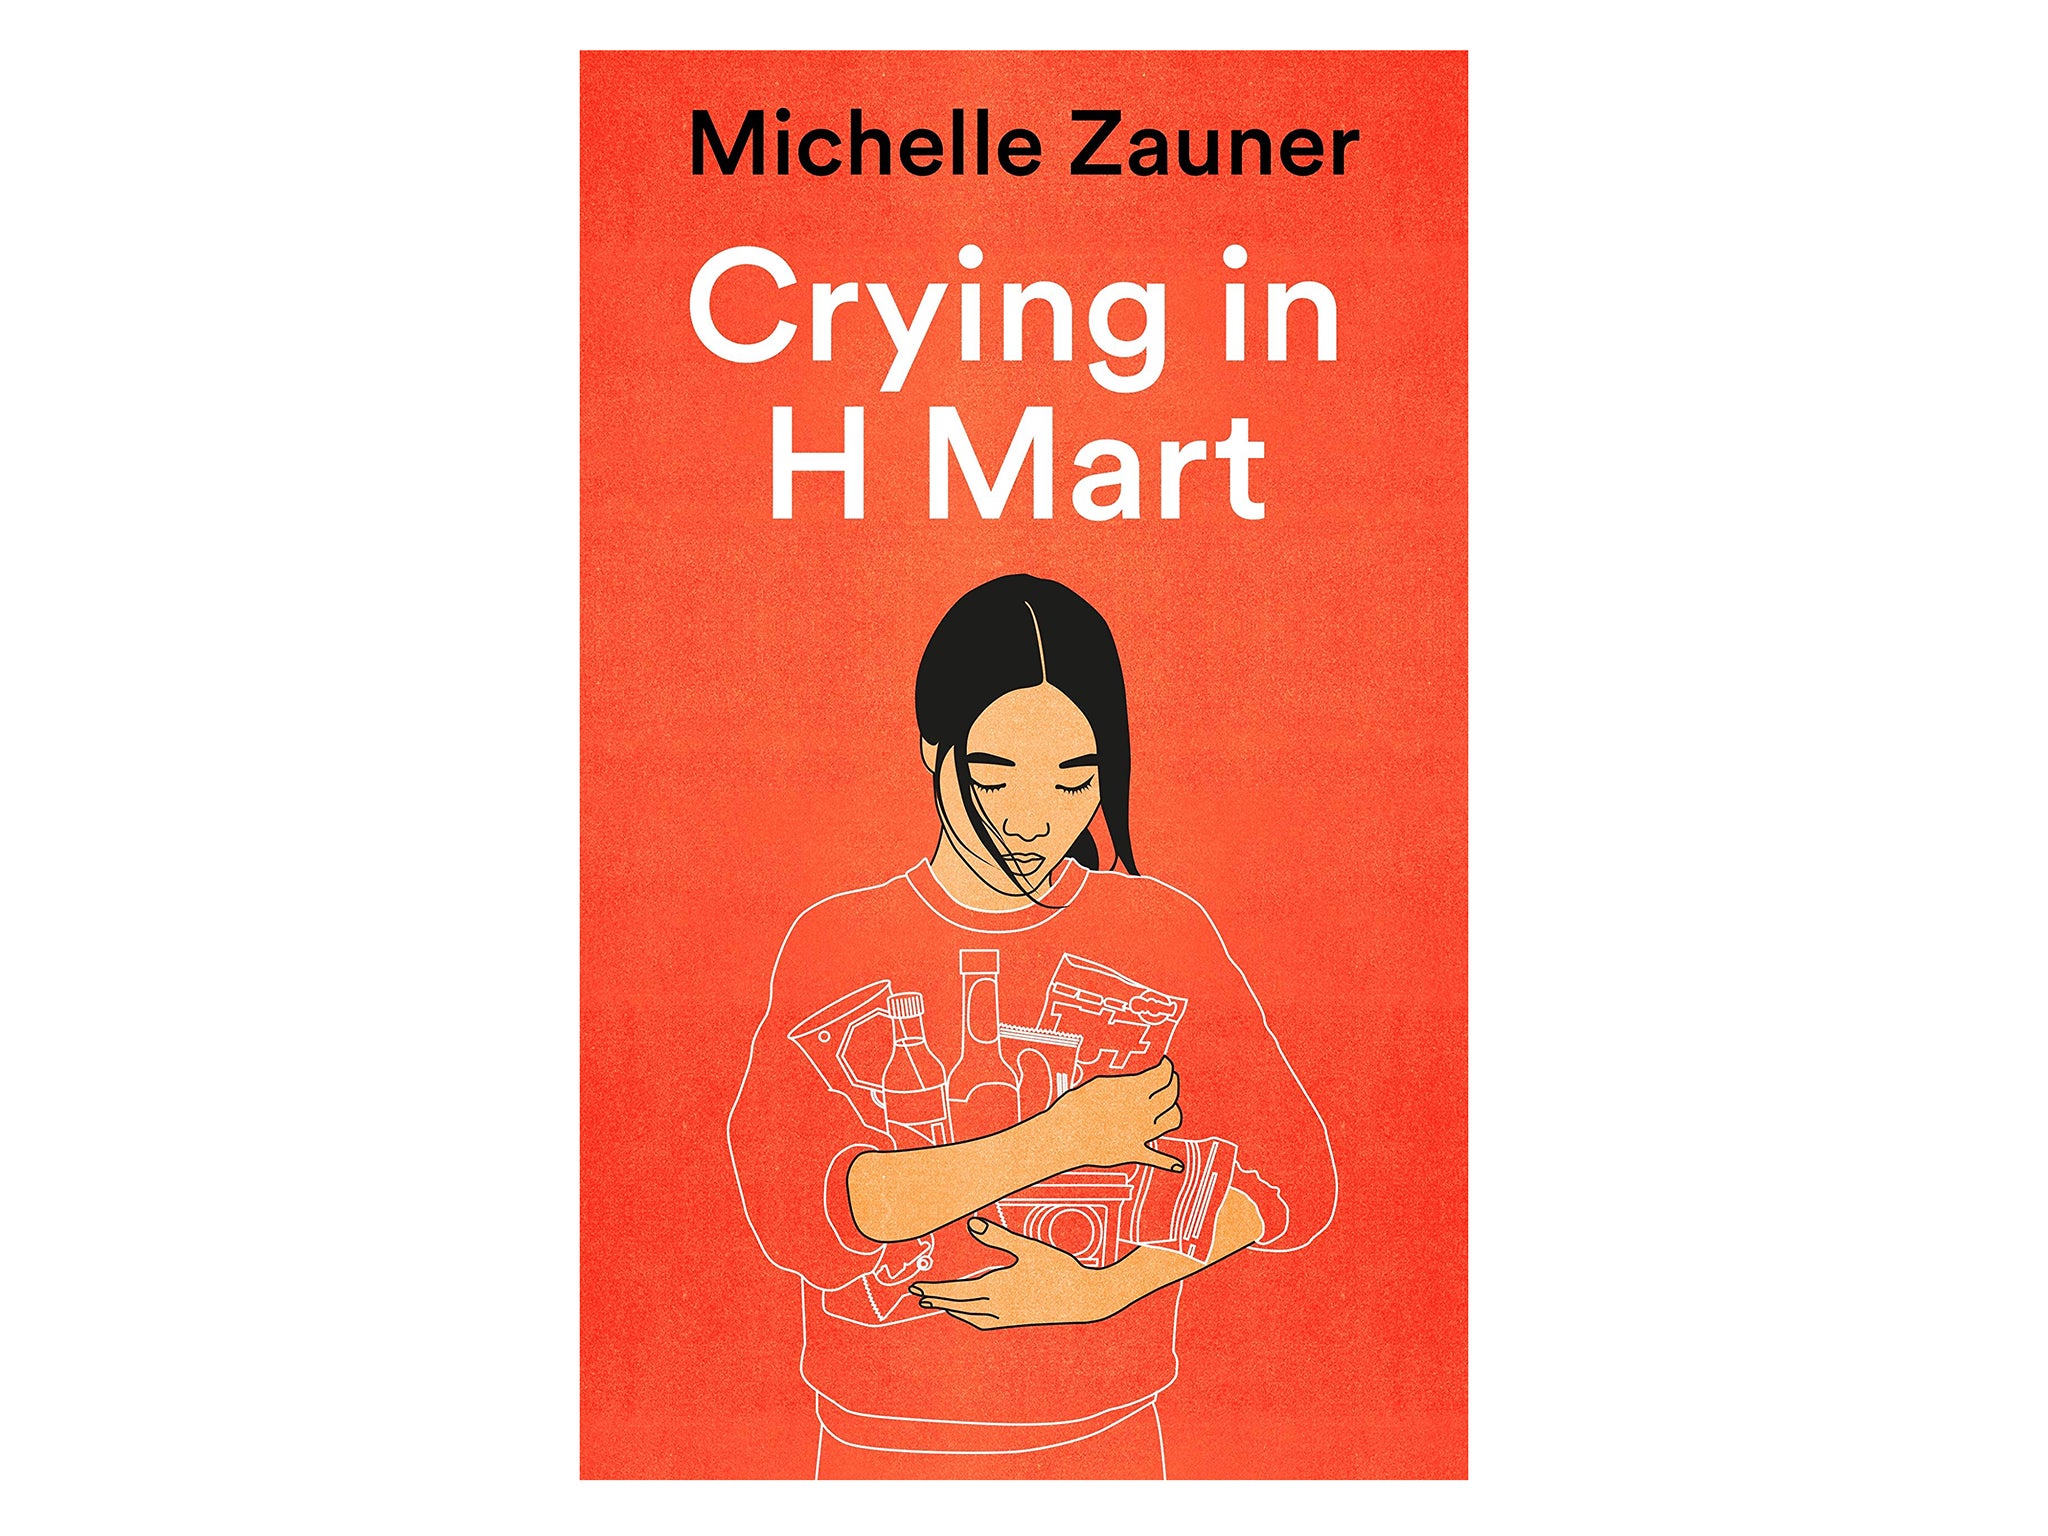 ‘Crying in H Mart’ by Michelle Zauner.jpeg